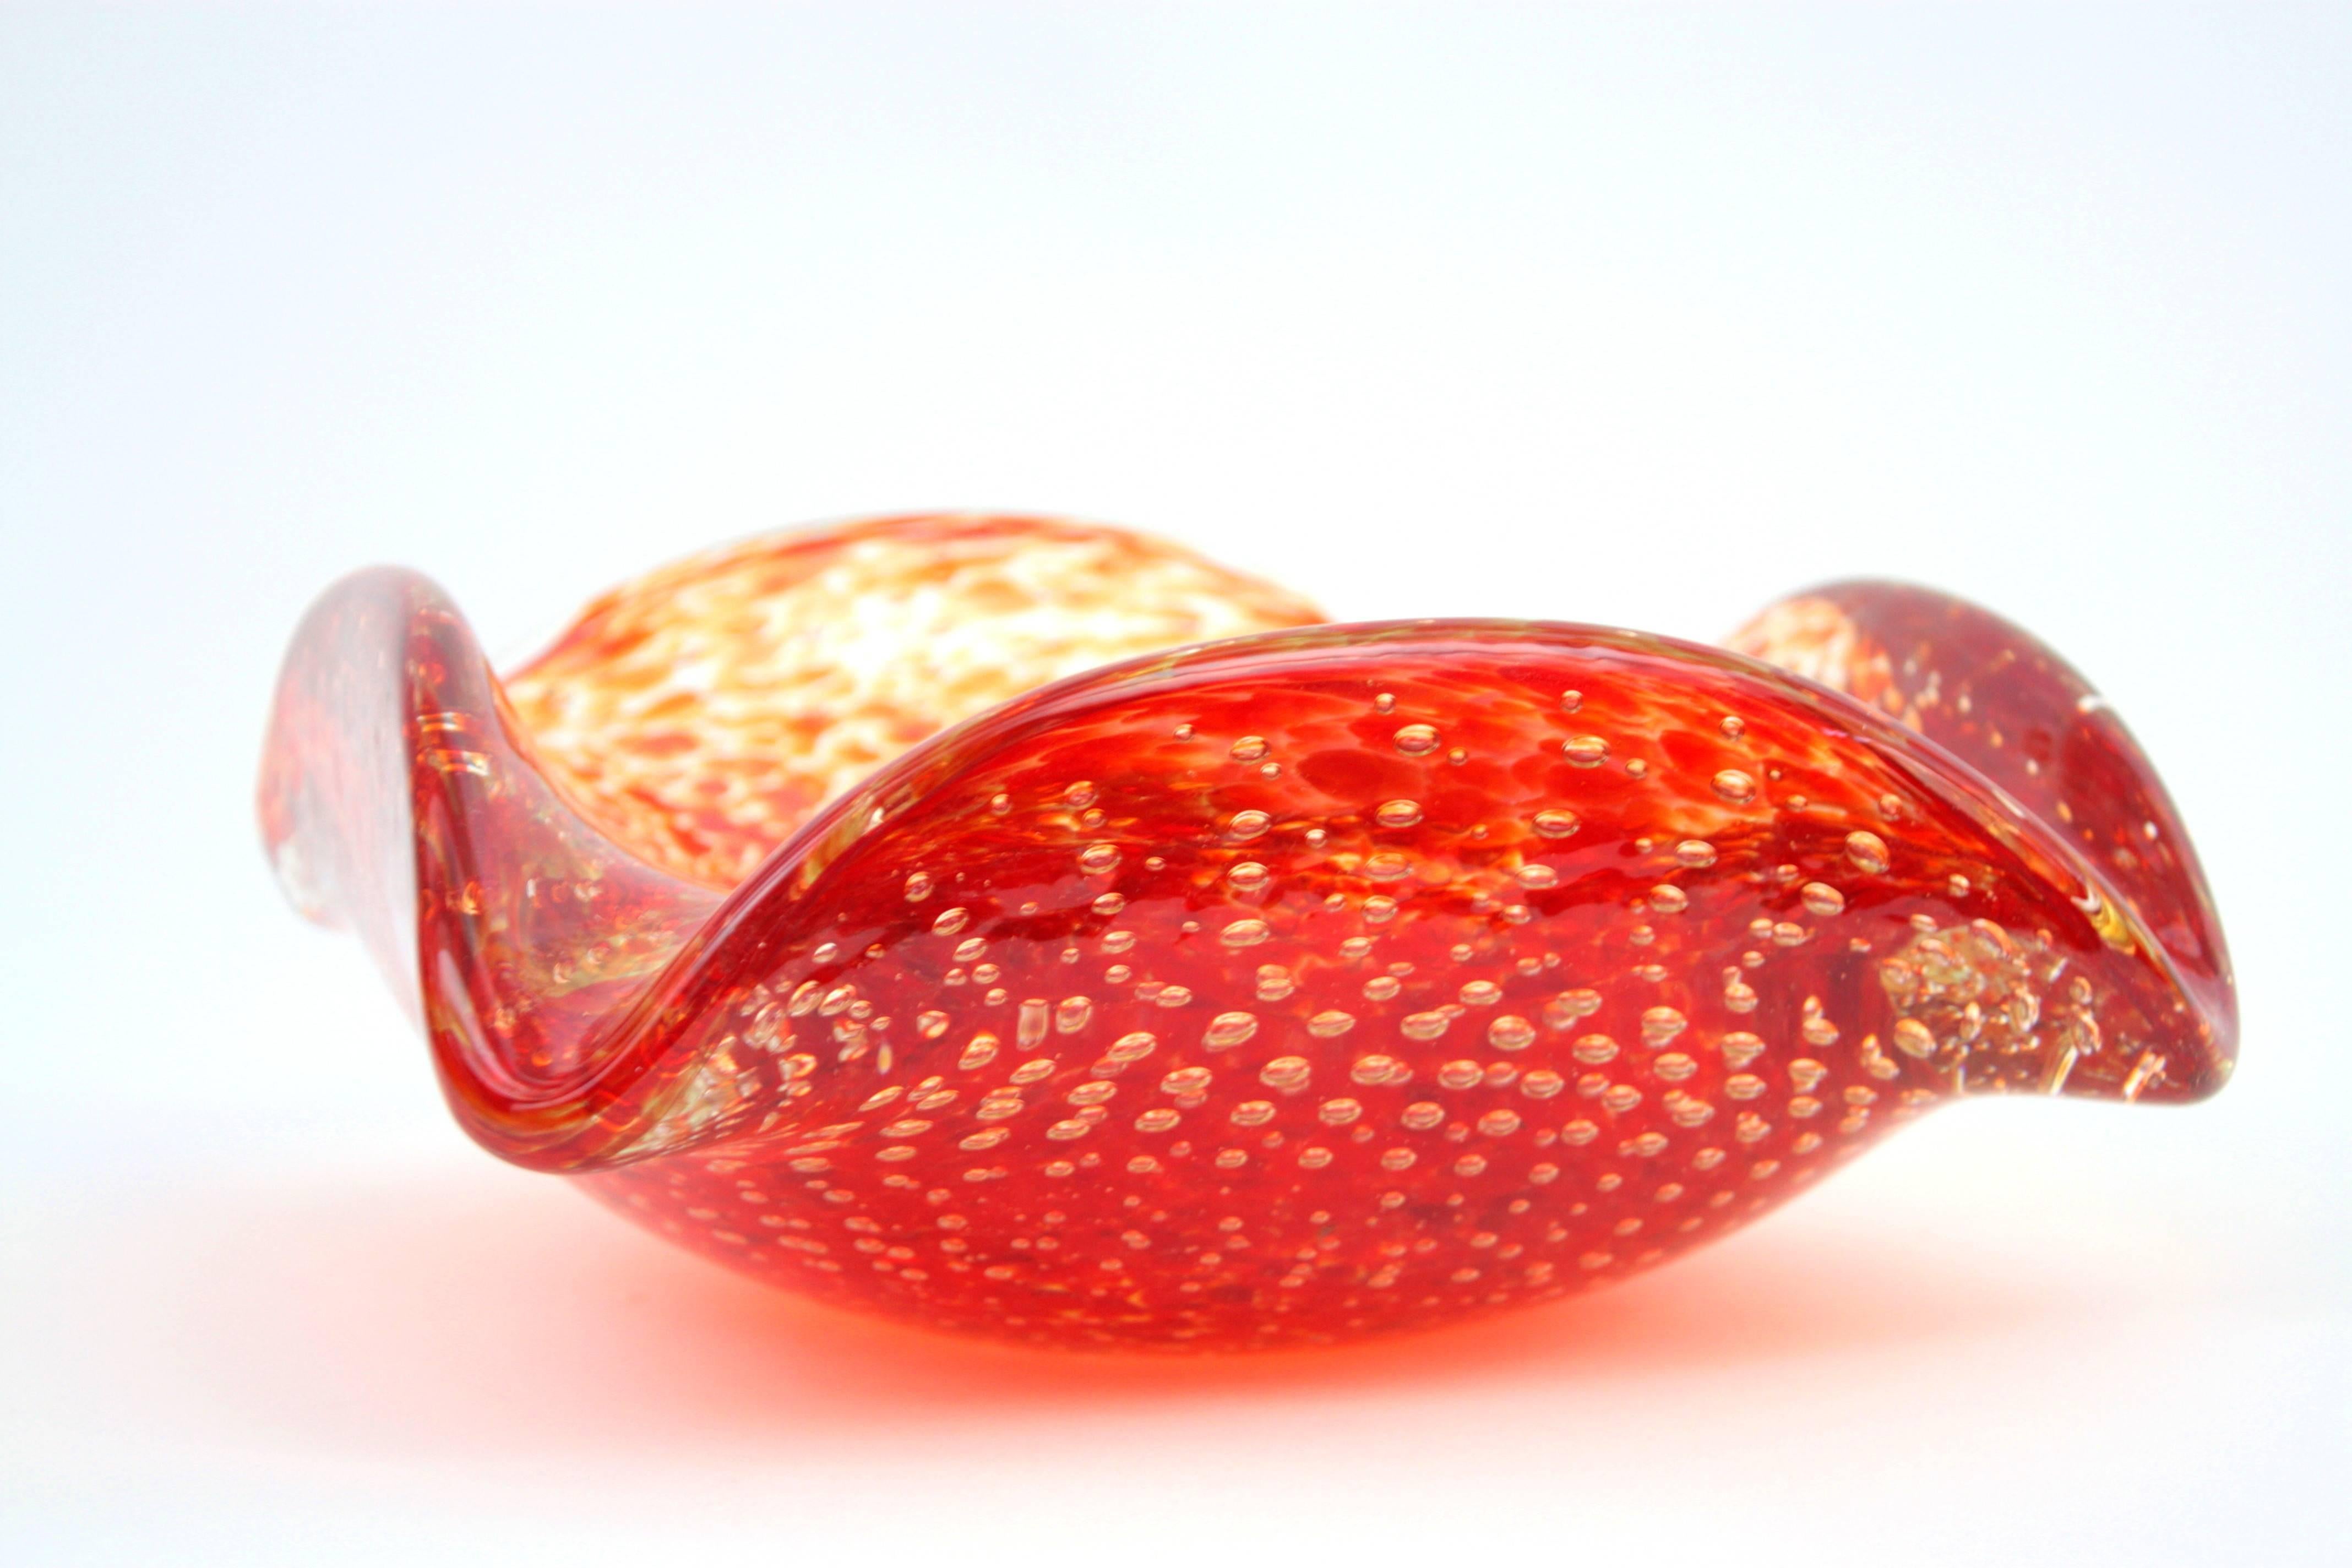 A gorgeous Murano art glass piece with bullicante technique. Very big size. Red and orange glass decorations cased in clear glass. Amazing shapes, very decorative,
Murano, circa 1960.

Please kindly check other Murano glass pieces available in